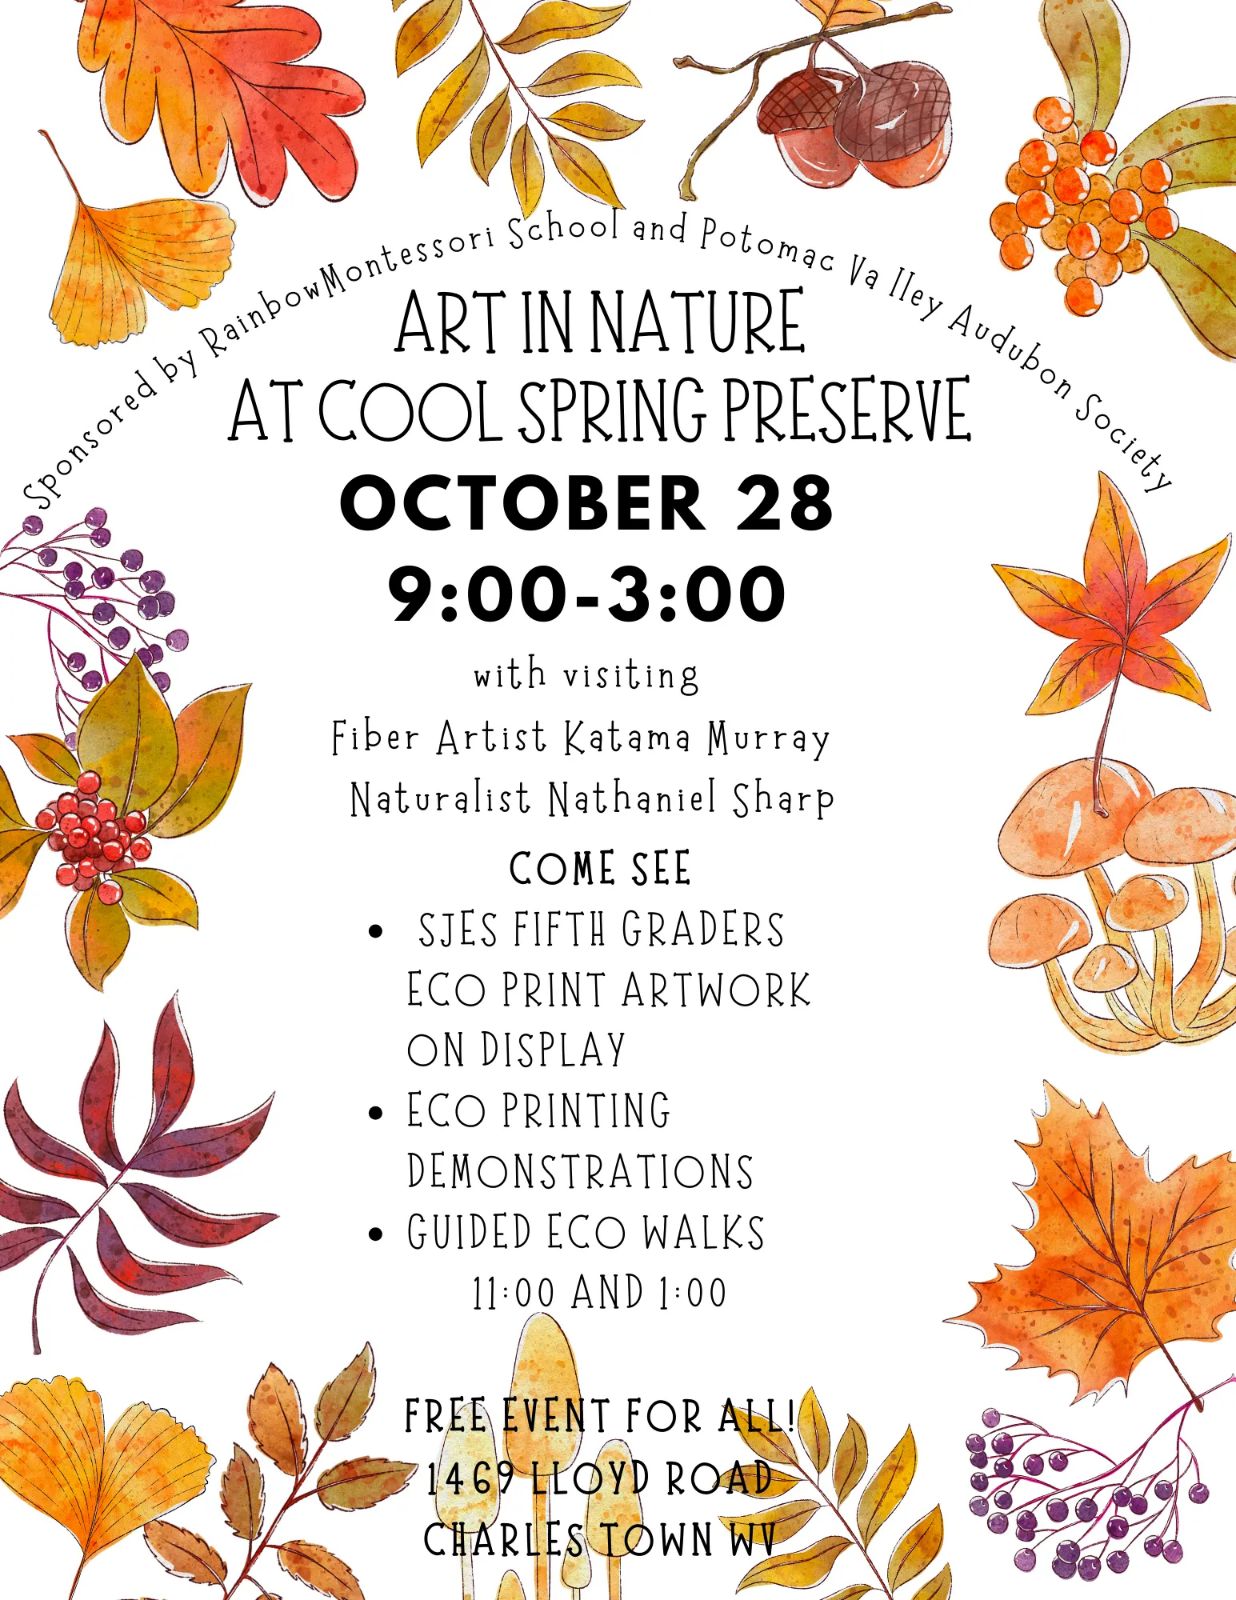 Fall nature items are in the background of text. Text reads: Sponsored by Rainbow Montessori School and Potomac Valley Audubon Society. Art in Nature at Cool Spring Preserve. October 28, 9:00-3:00 with visiting fiber artist Katama Murray and Naturalist Nathaniel Sharp. Come see SJES (South Jefferson Elementry School) fifth graders eco print artwork on display, eco printing demonstrations, guided eco walks at 11:00 and 1:00. Free event for all! 1469 Lloyd Road, Charles Town, WV